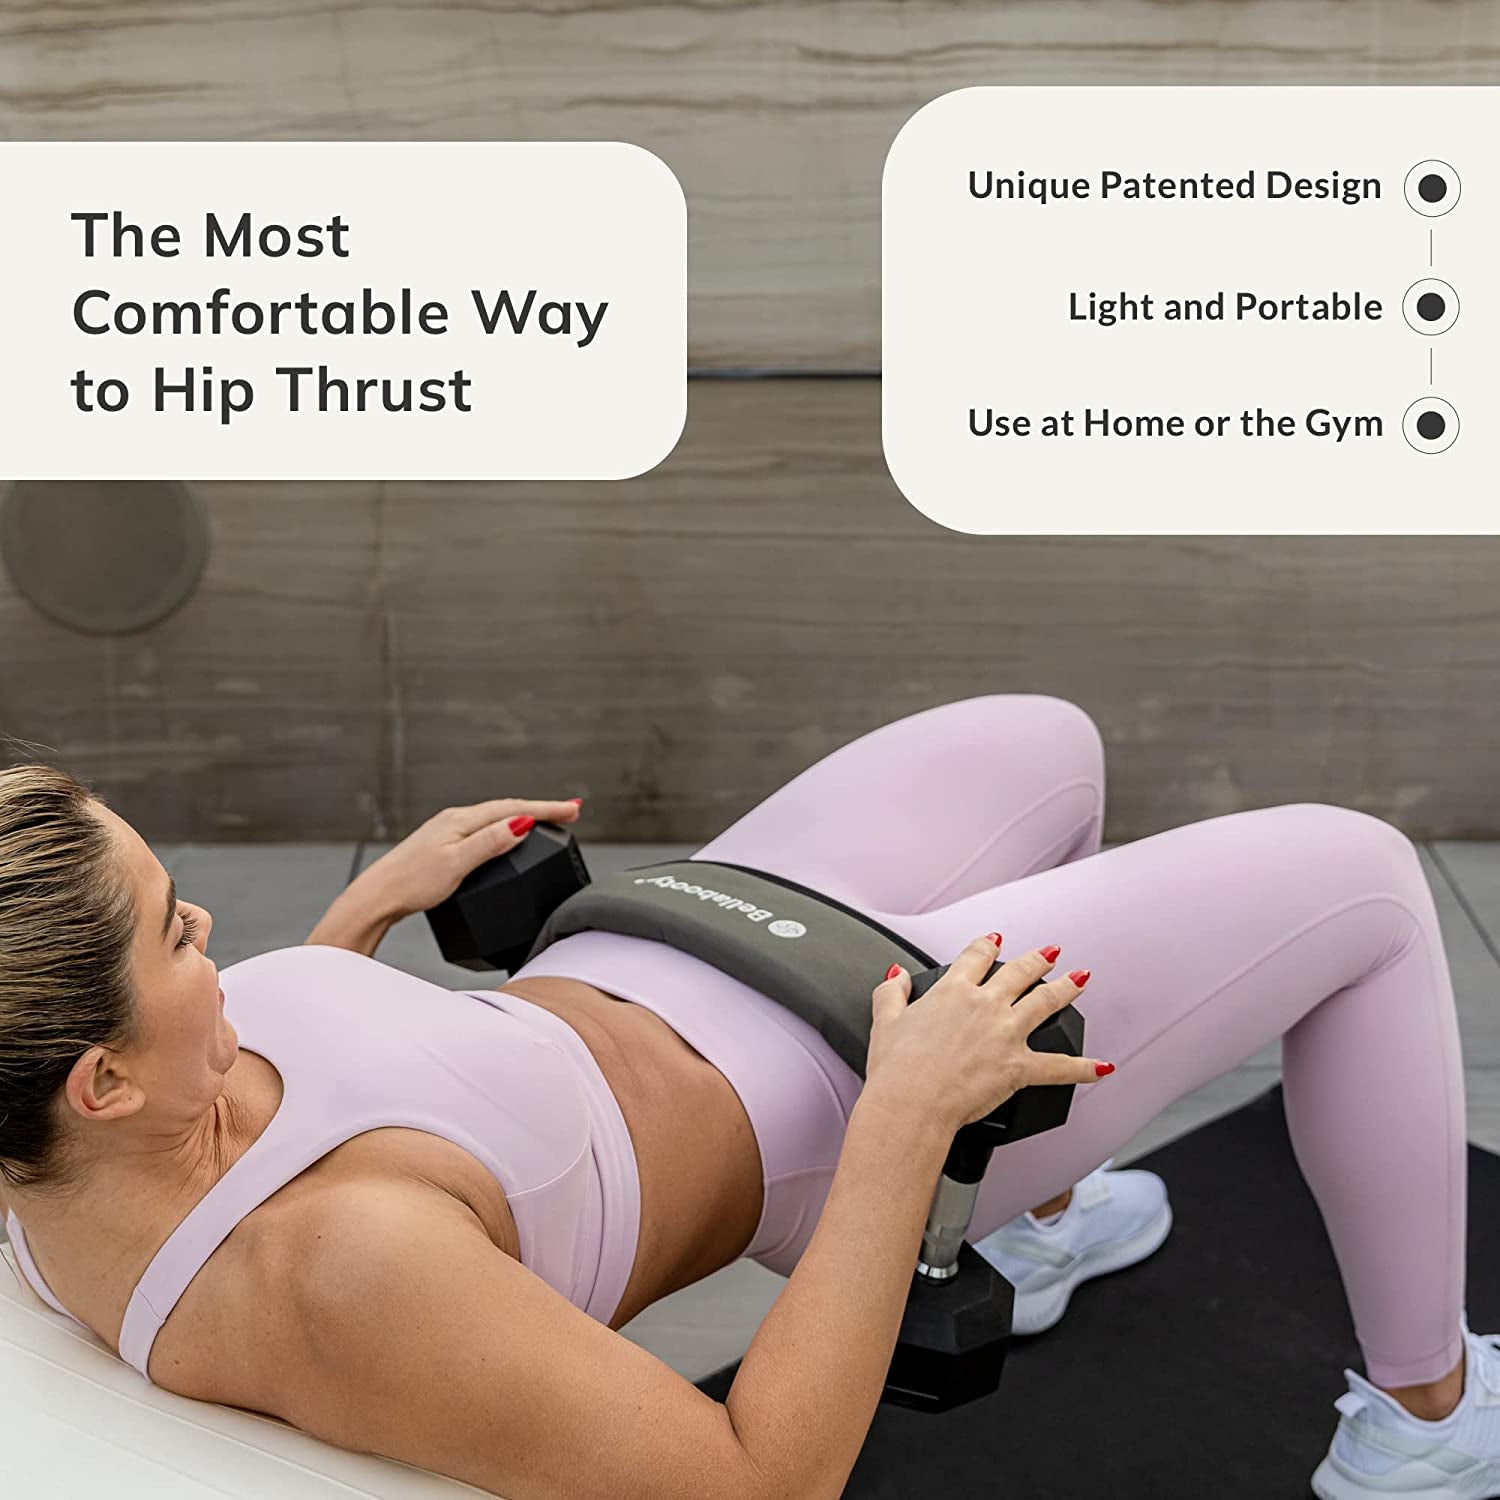 Exercise Hip Thrust Belt, Easy to Use with Dumbbells, Kettlebells, or Plates, Slip-Resistant Padding That Protects Your Hips for the Gym, Home Workouts, or on the Go